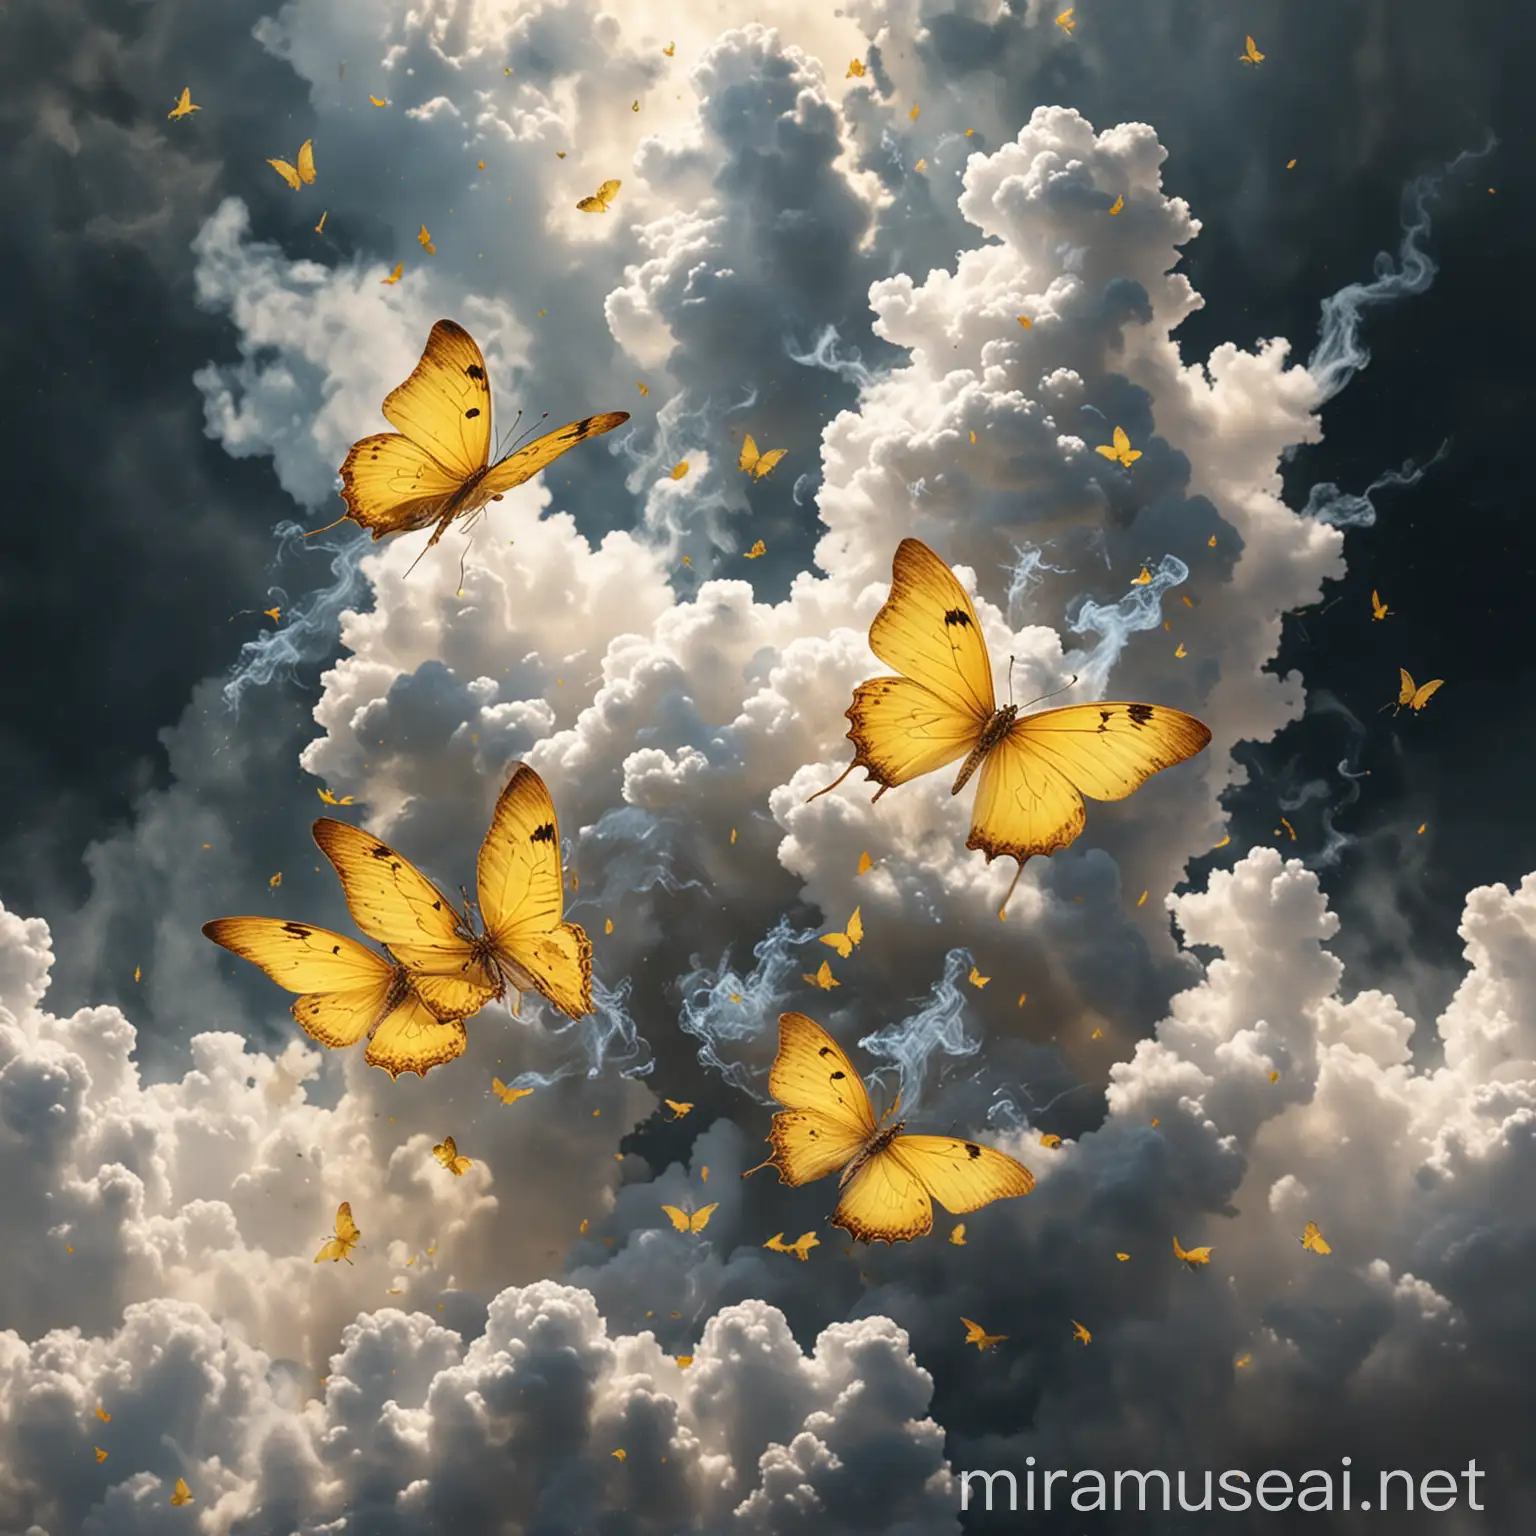 Tranquil Yellow Butterflies in Clouds A Relaxing Scene